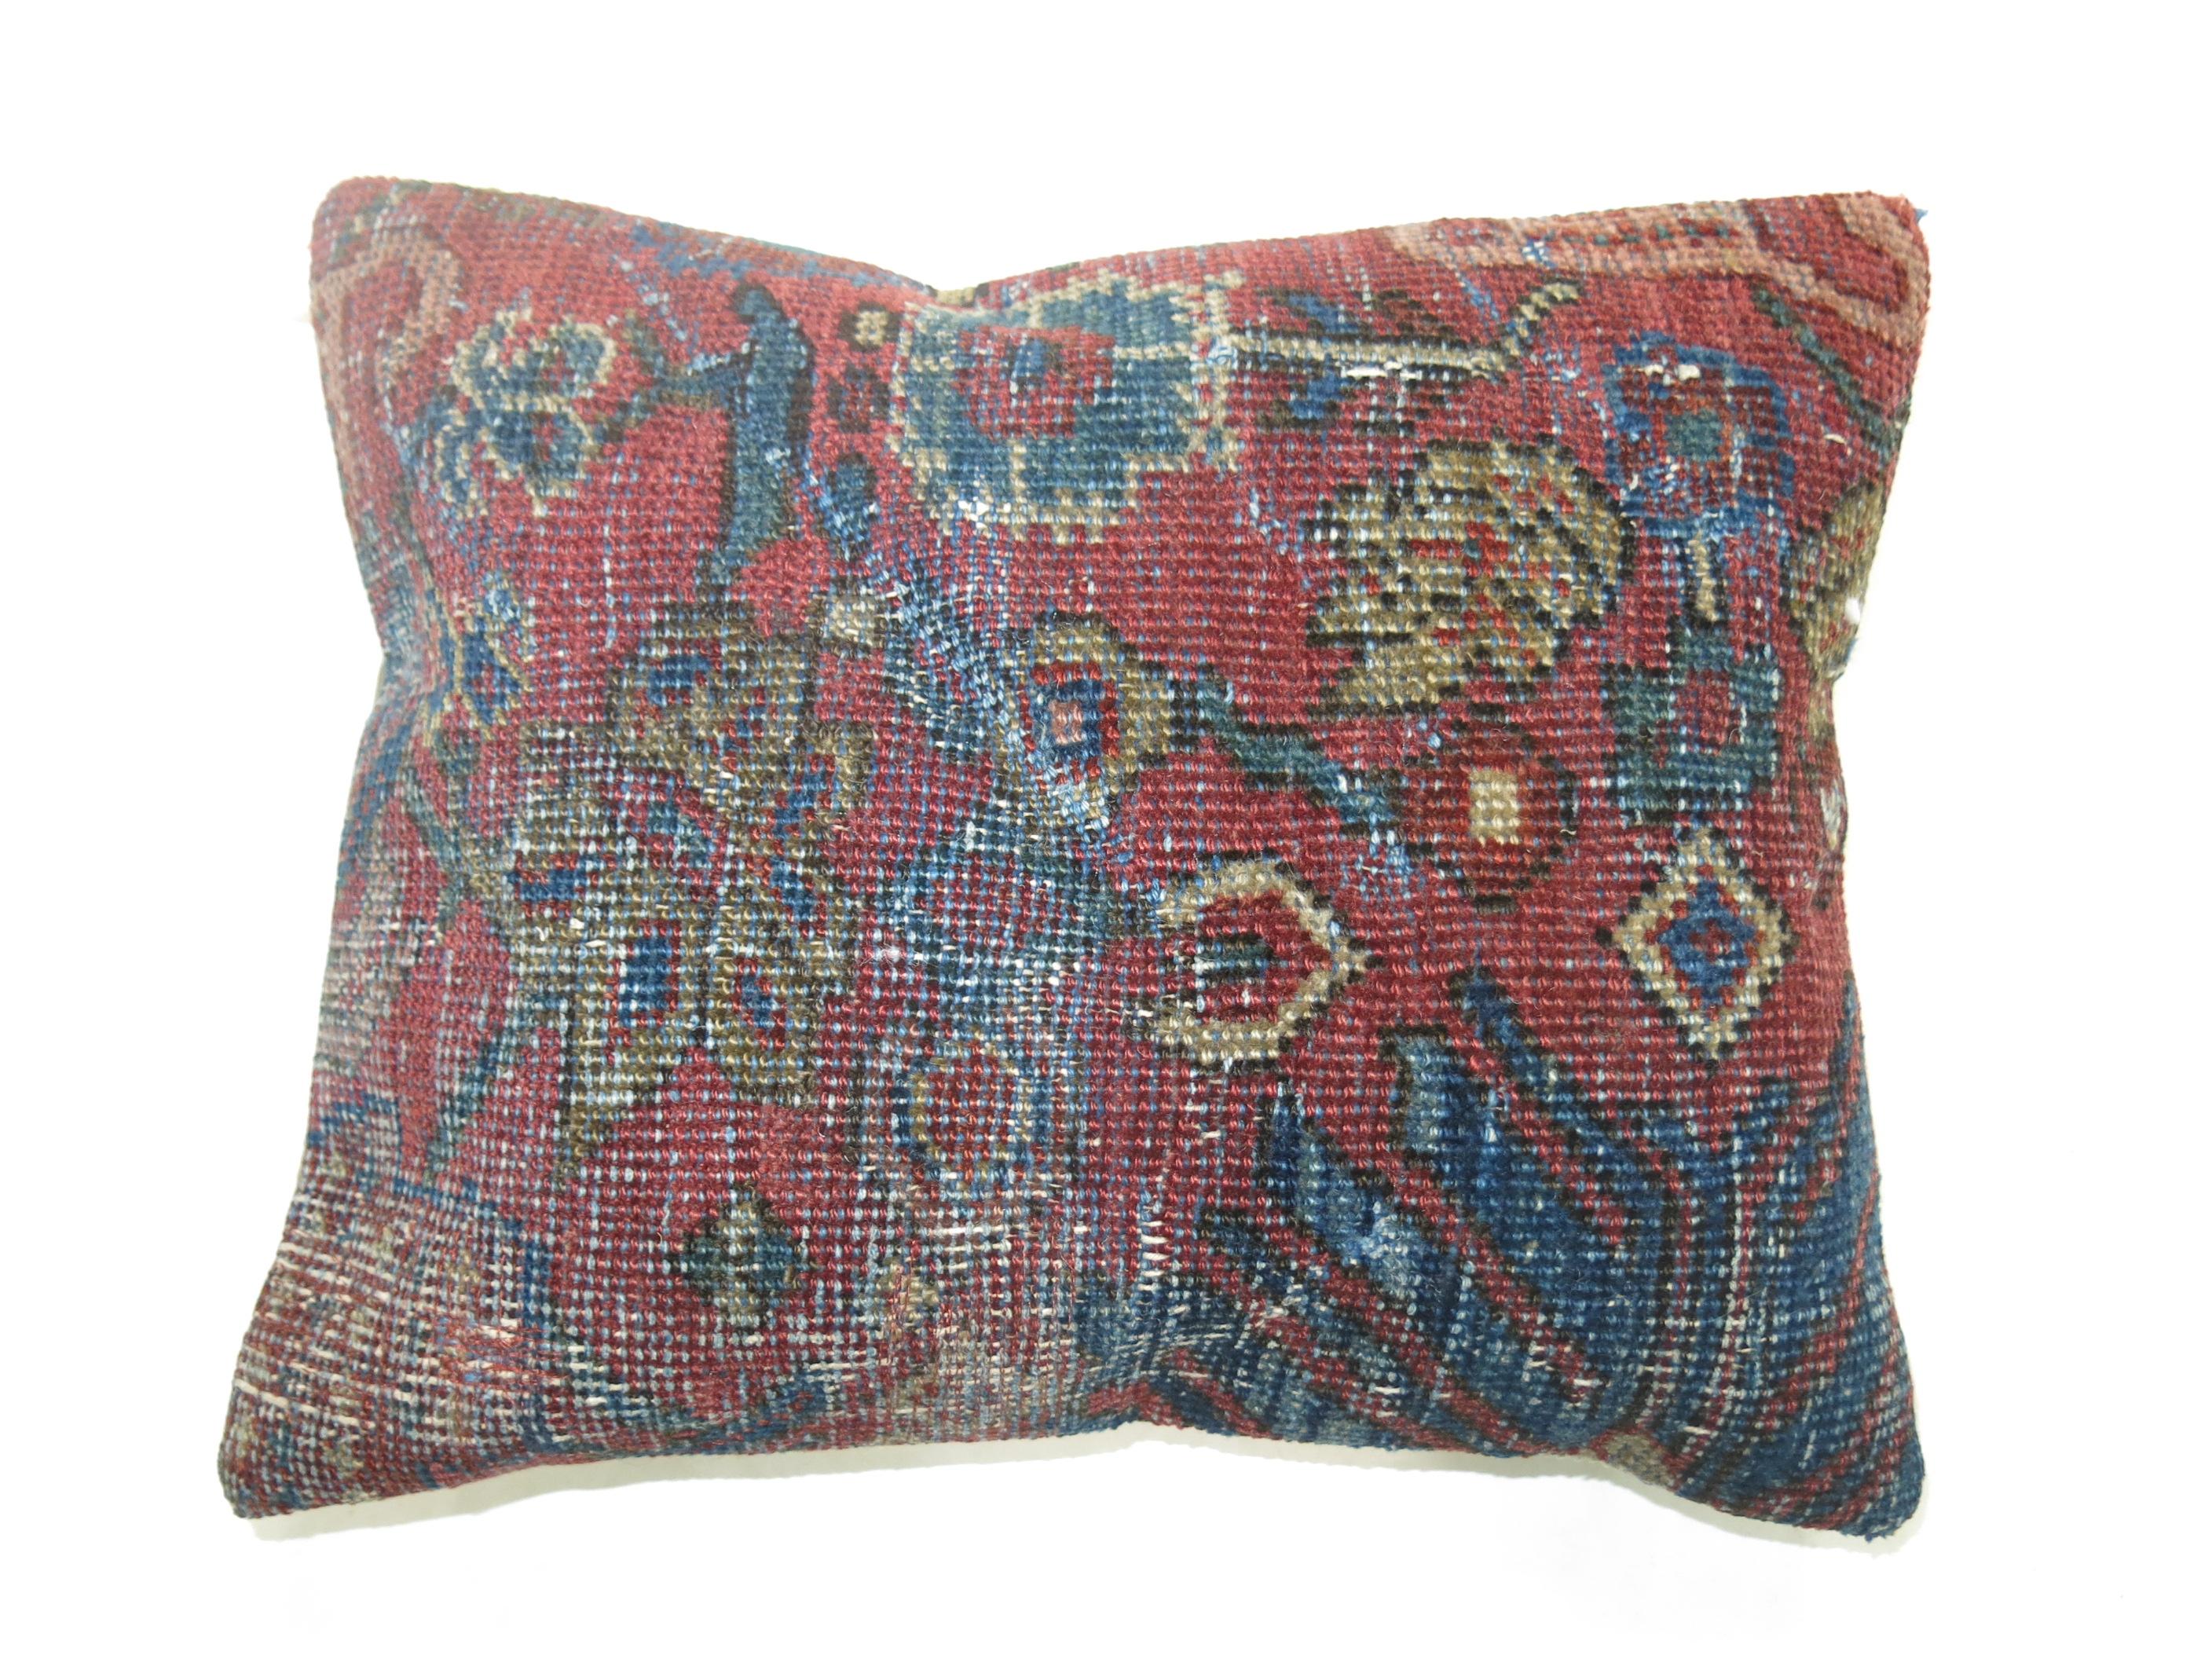 Pillow made from antique Persian Mahal rug with cotton back.

Measures: 13'' x 16''.